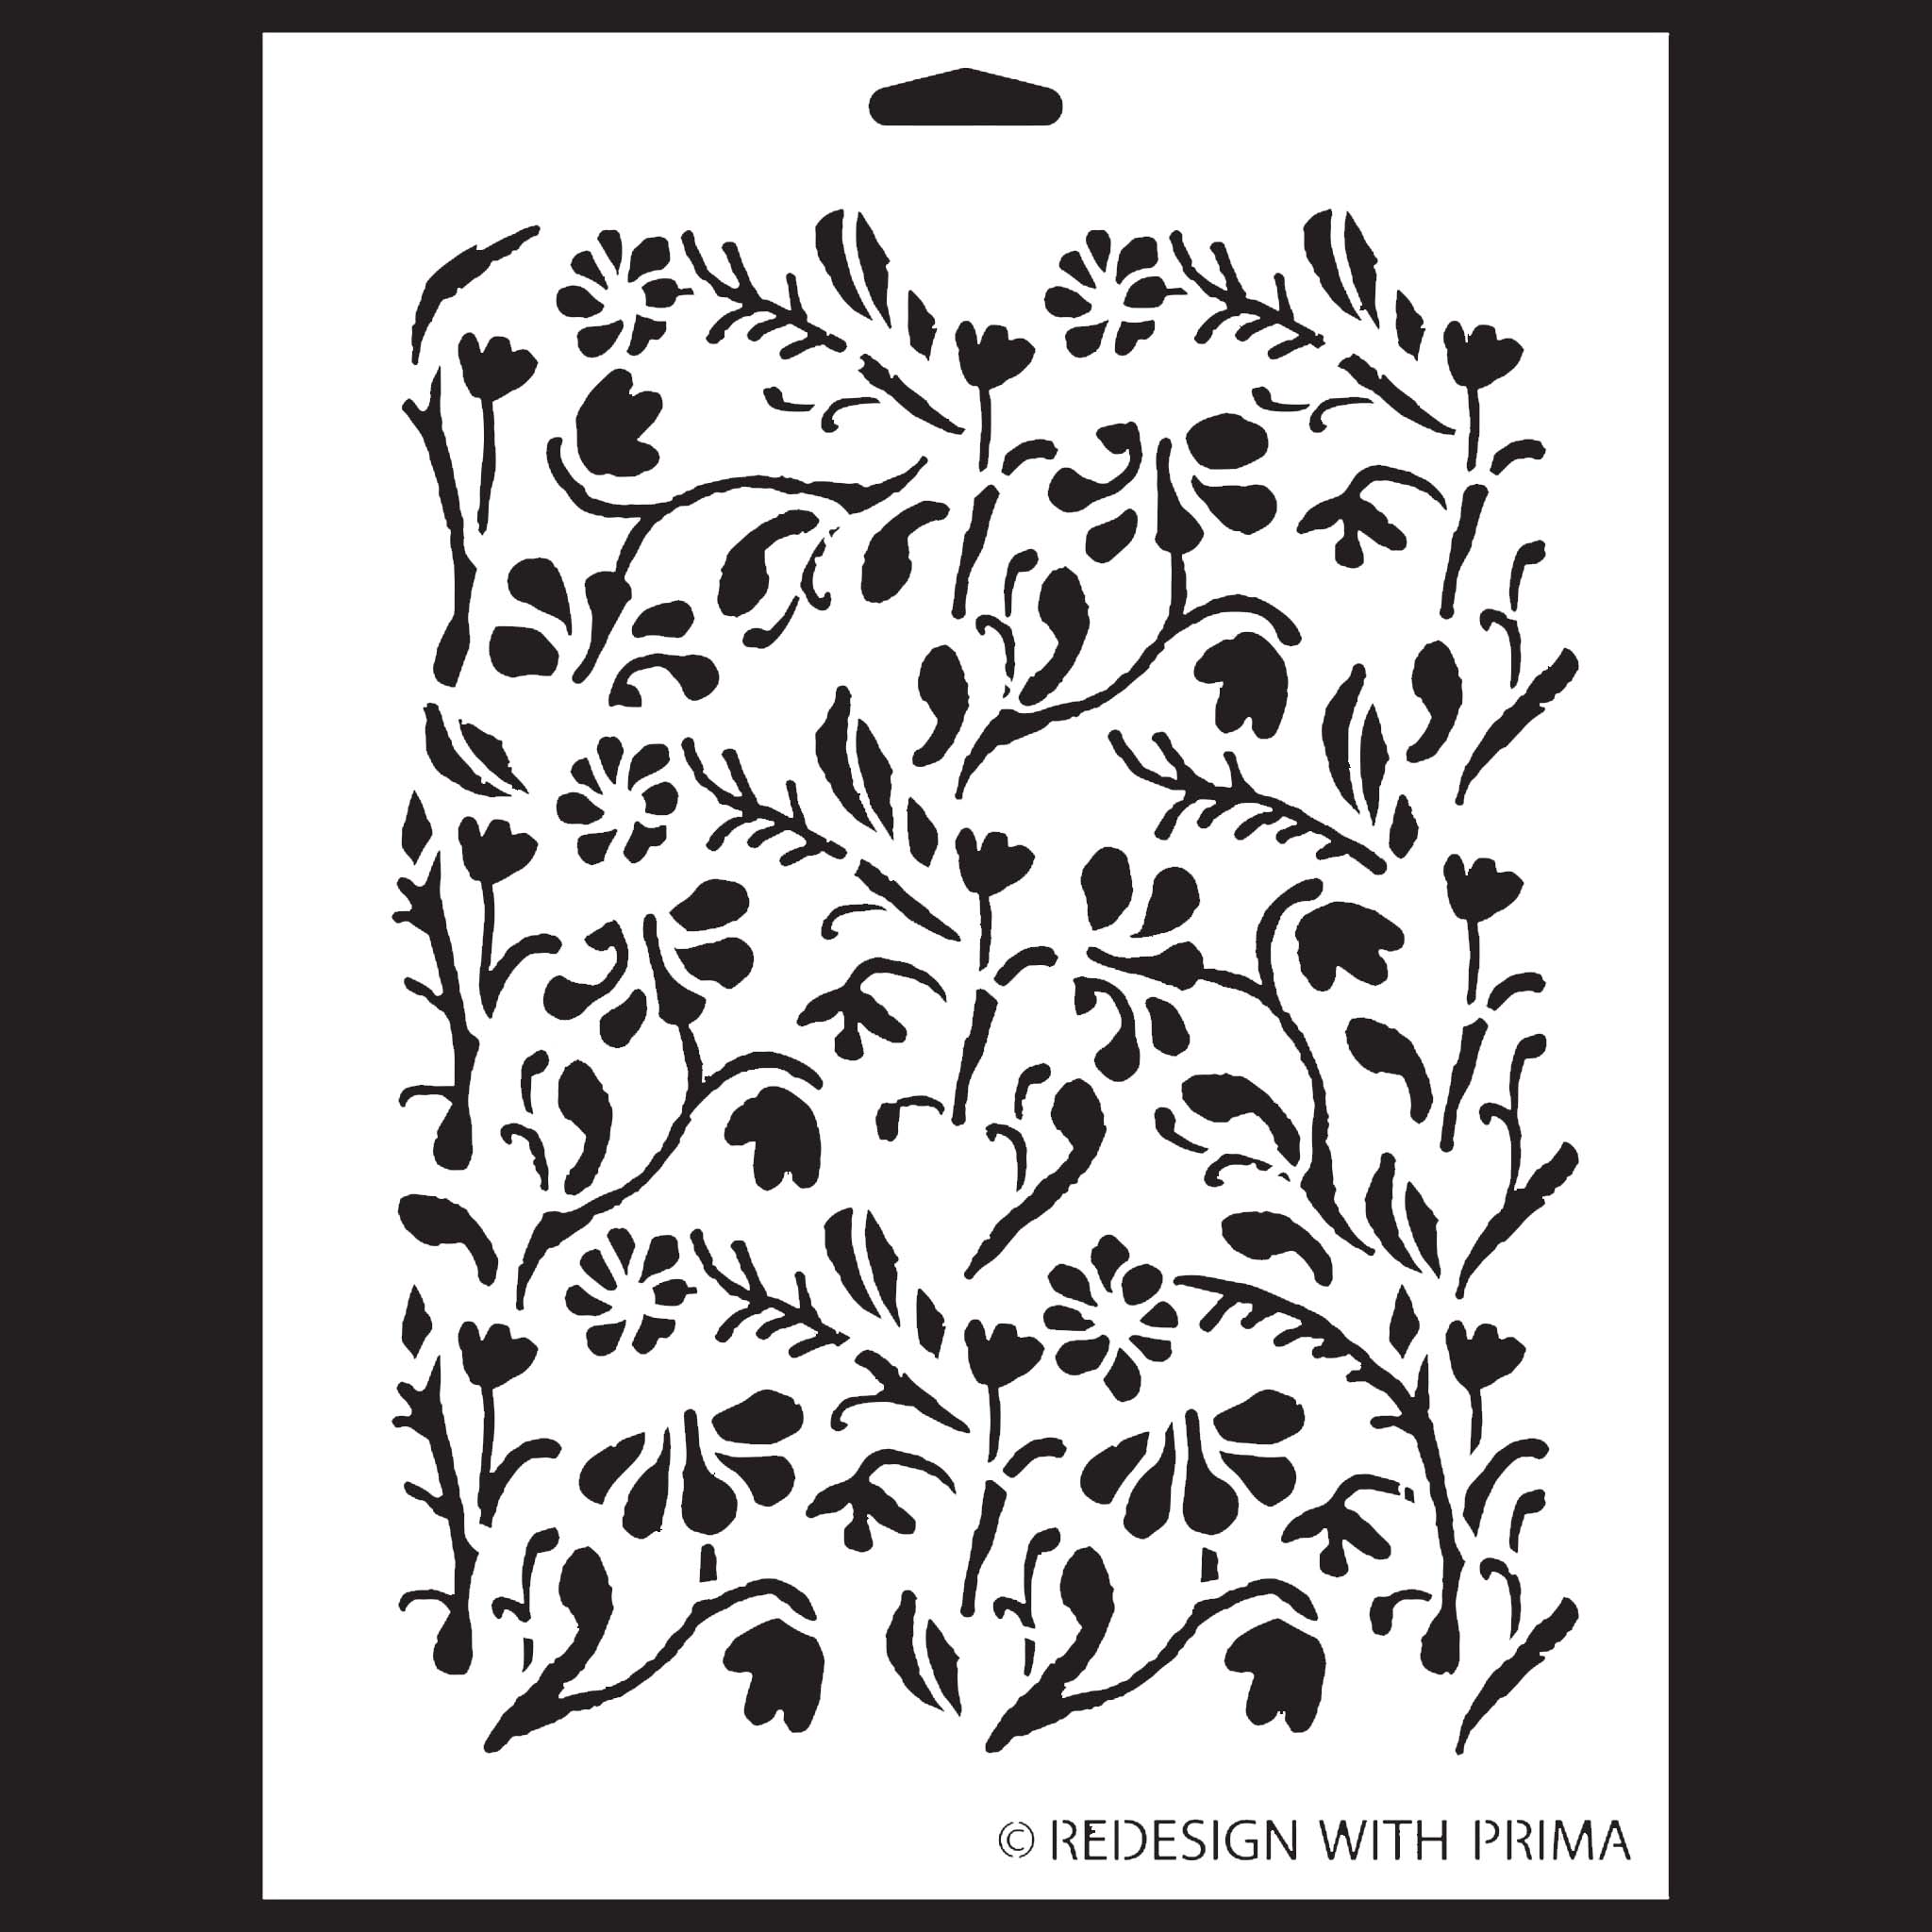 A white stencil against a black background that features a dainty floral design.